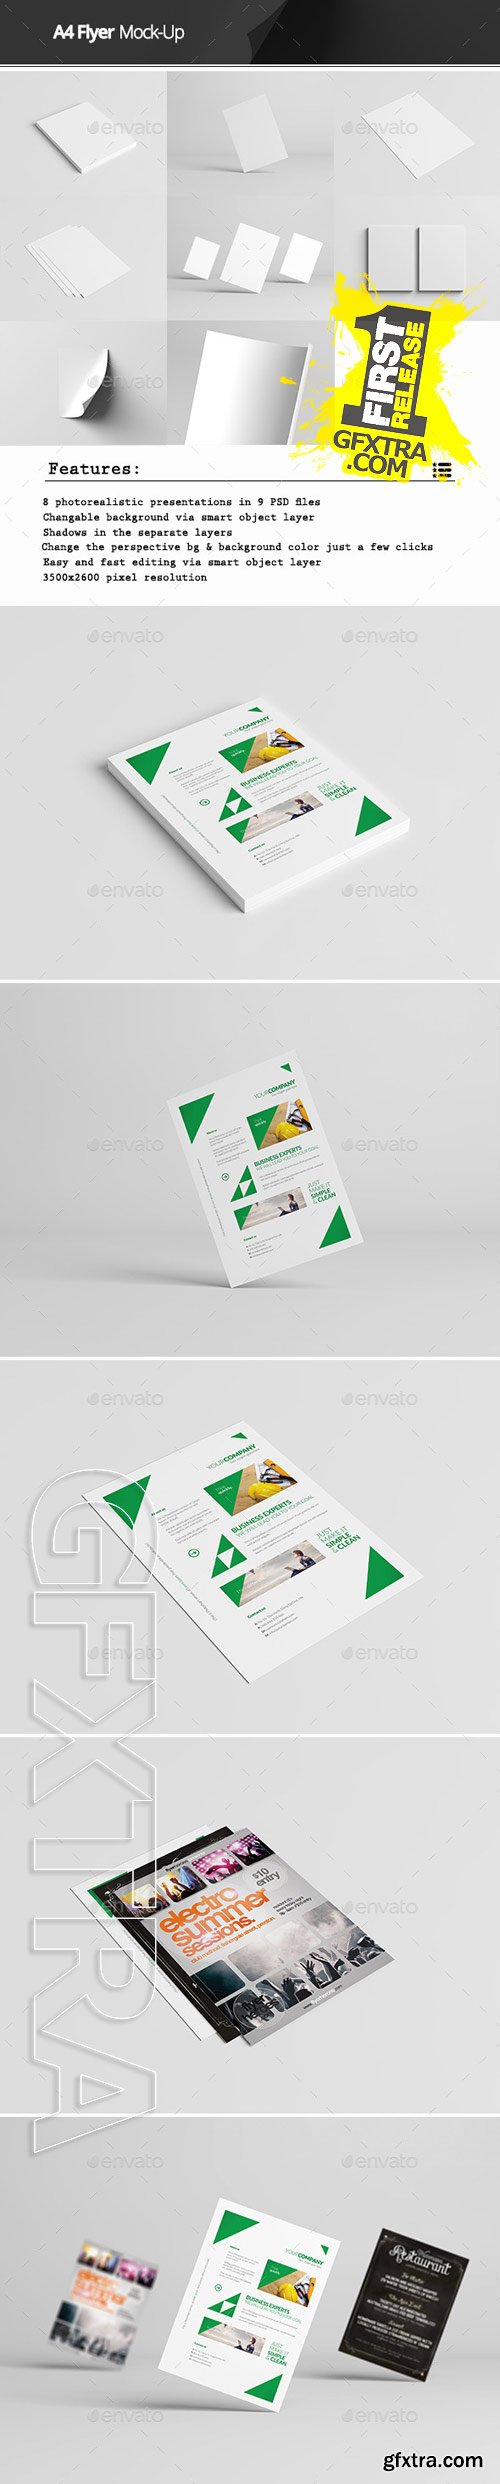 GraphicRiver - A4 Flyer Mock-Up 10860291